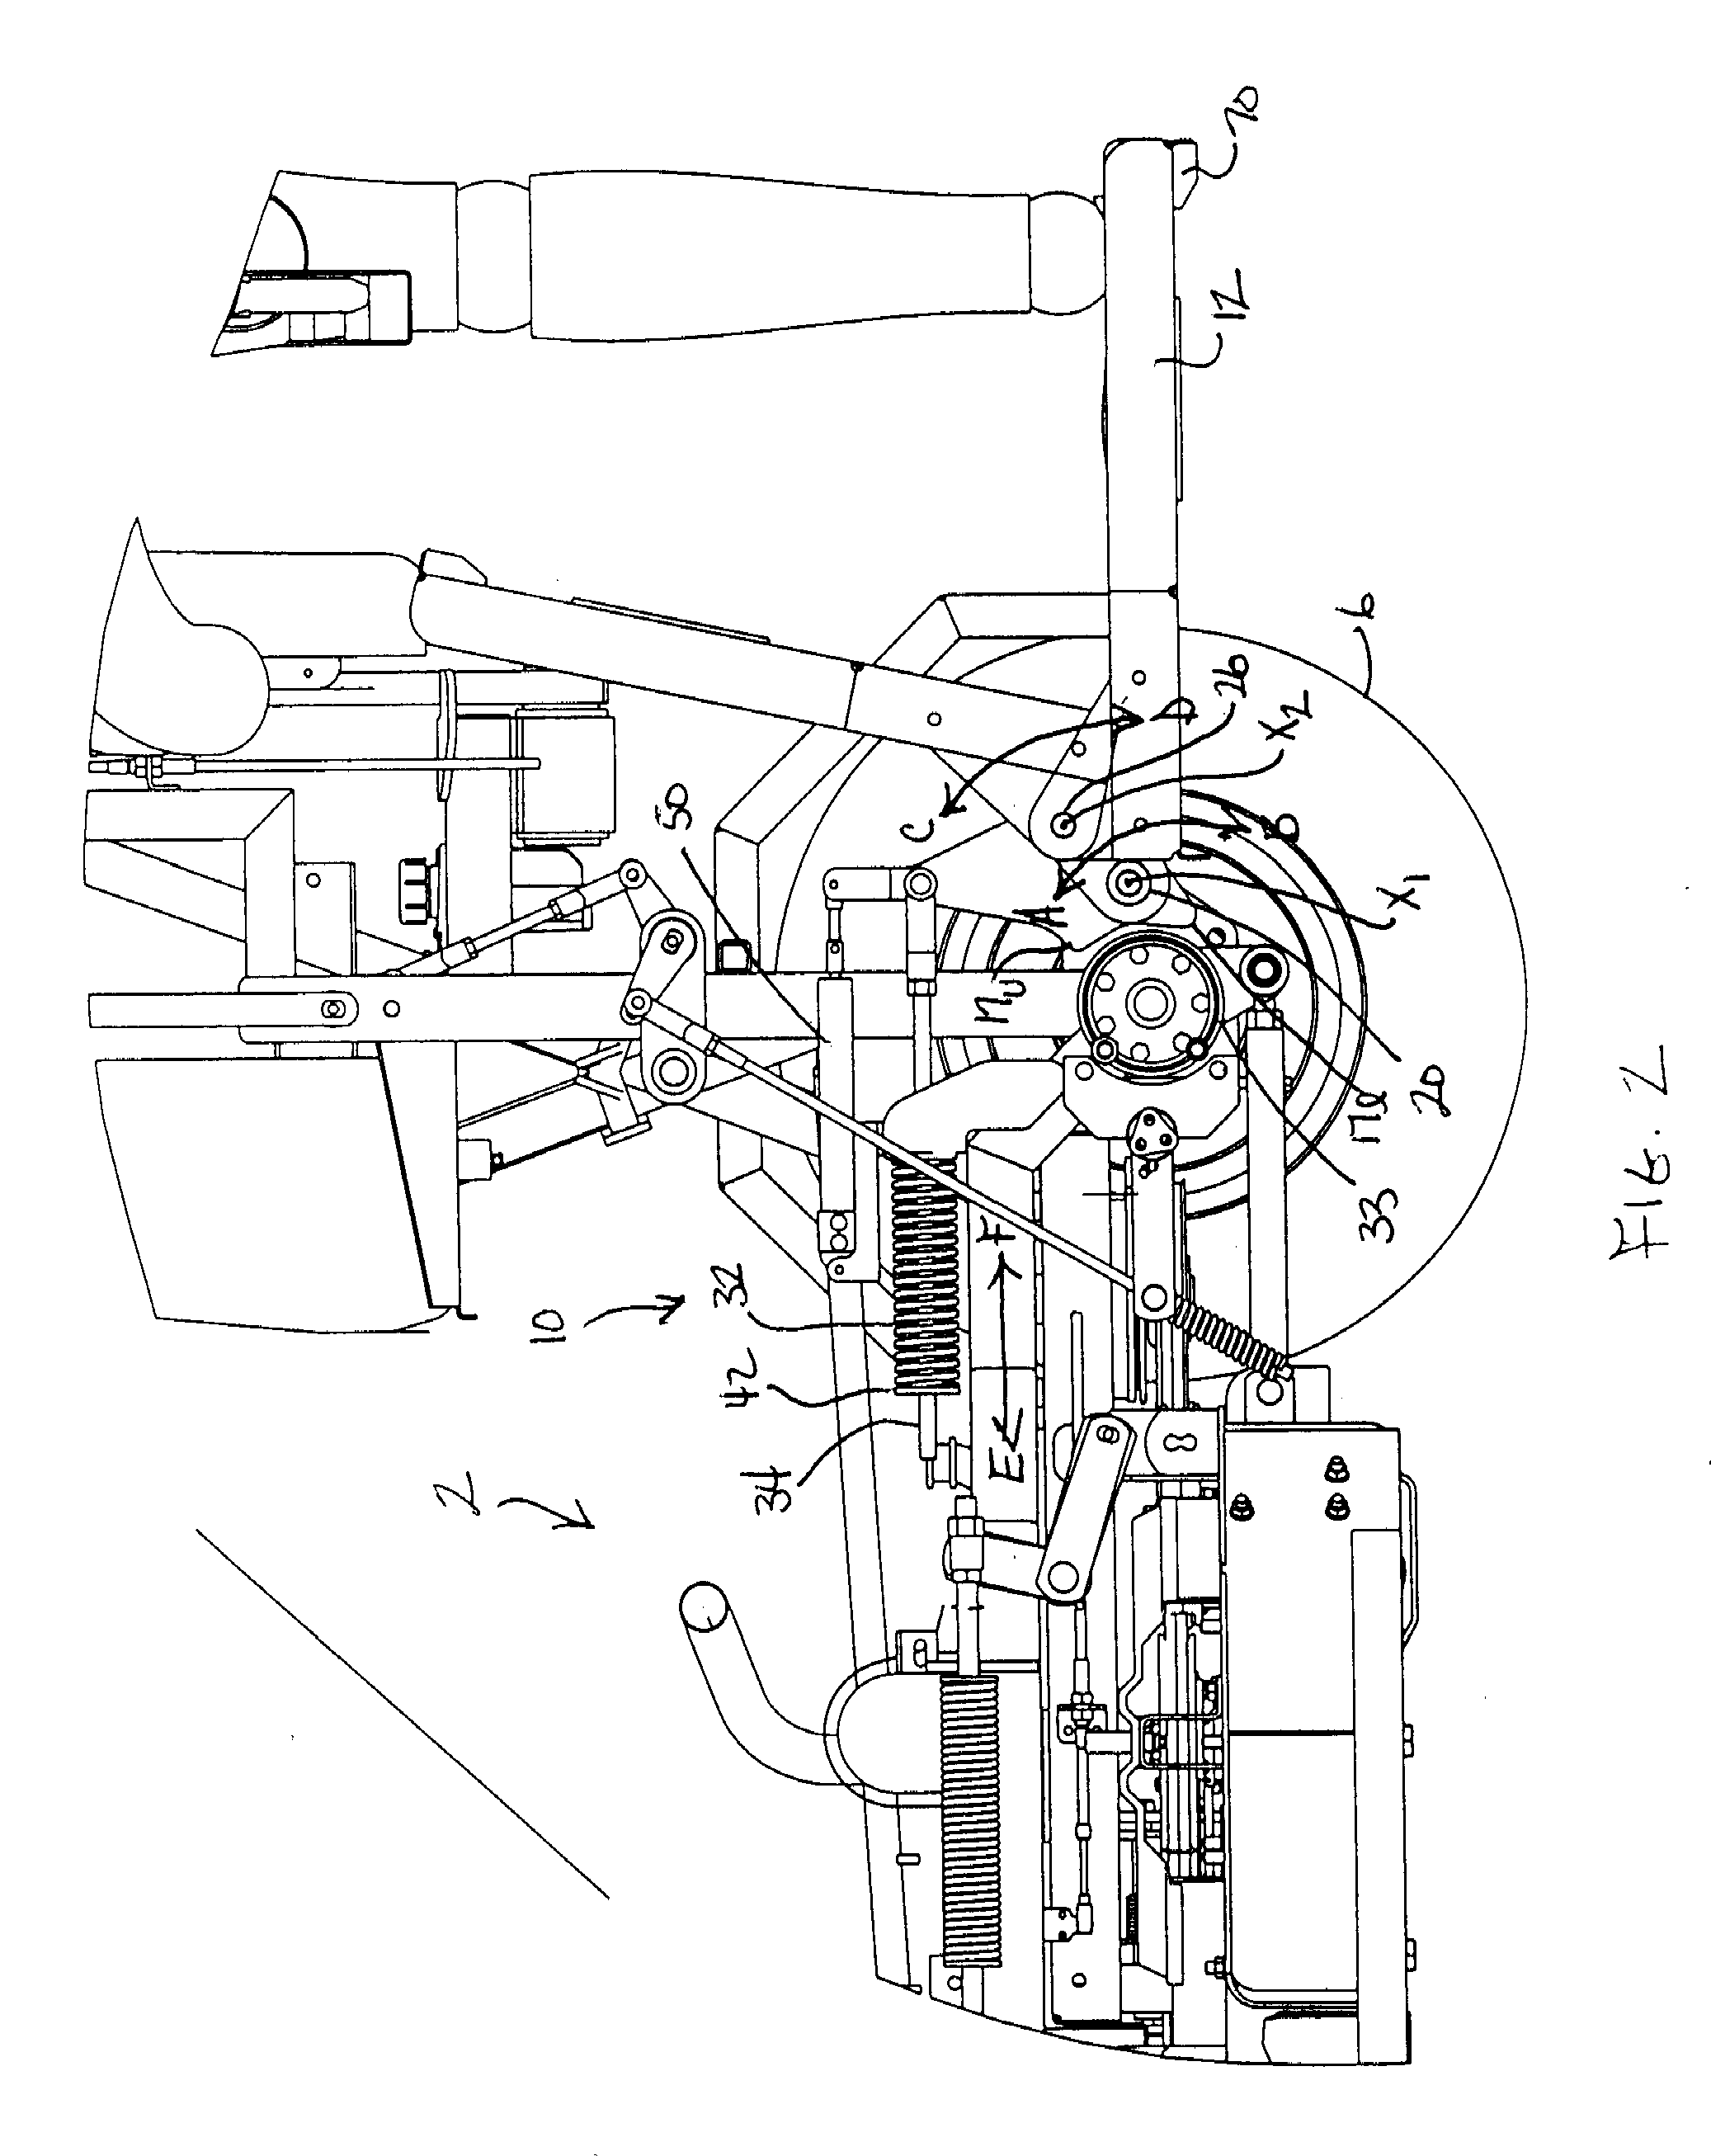 Mower with cushioned suspension for operator support platform having stowed and deployed positions